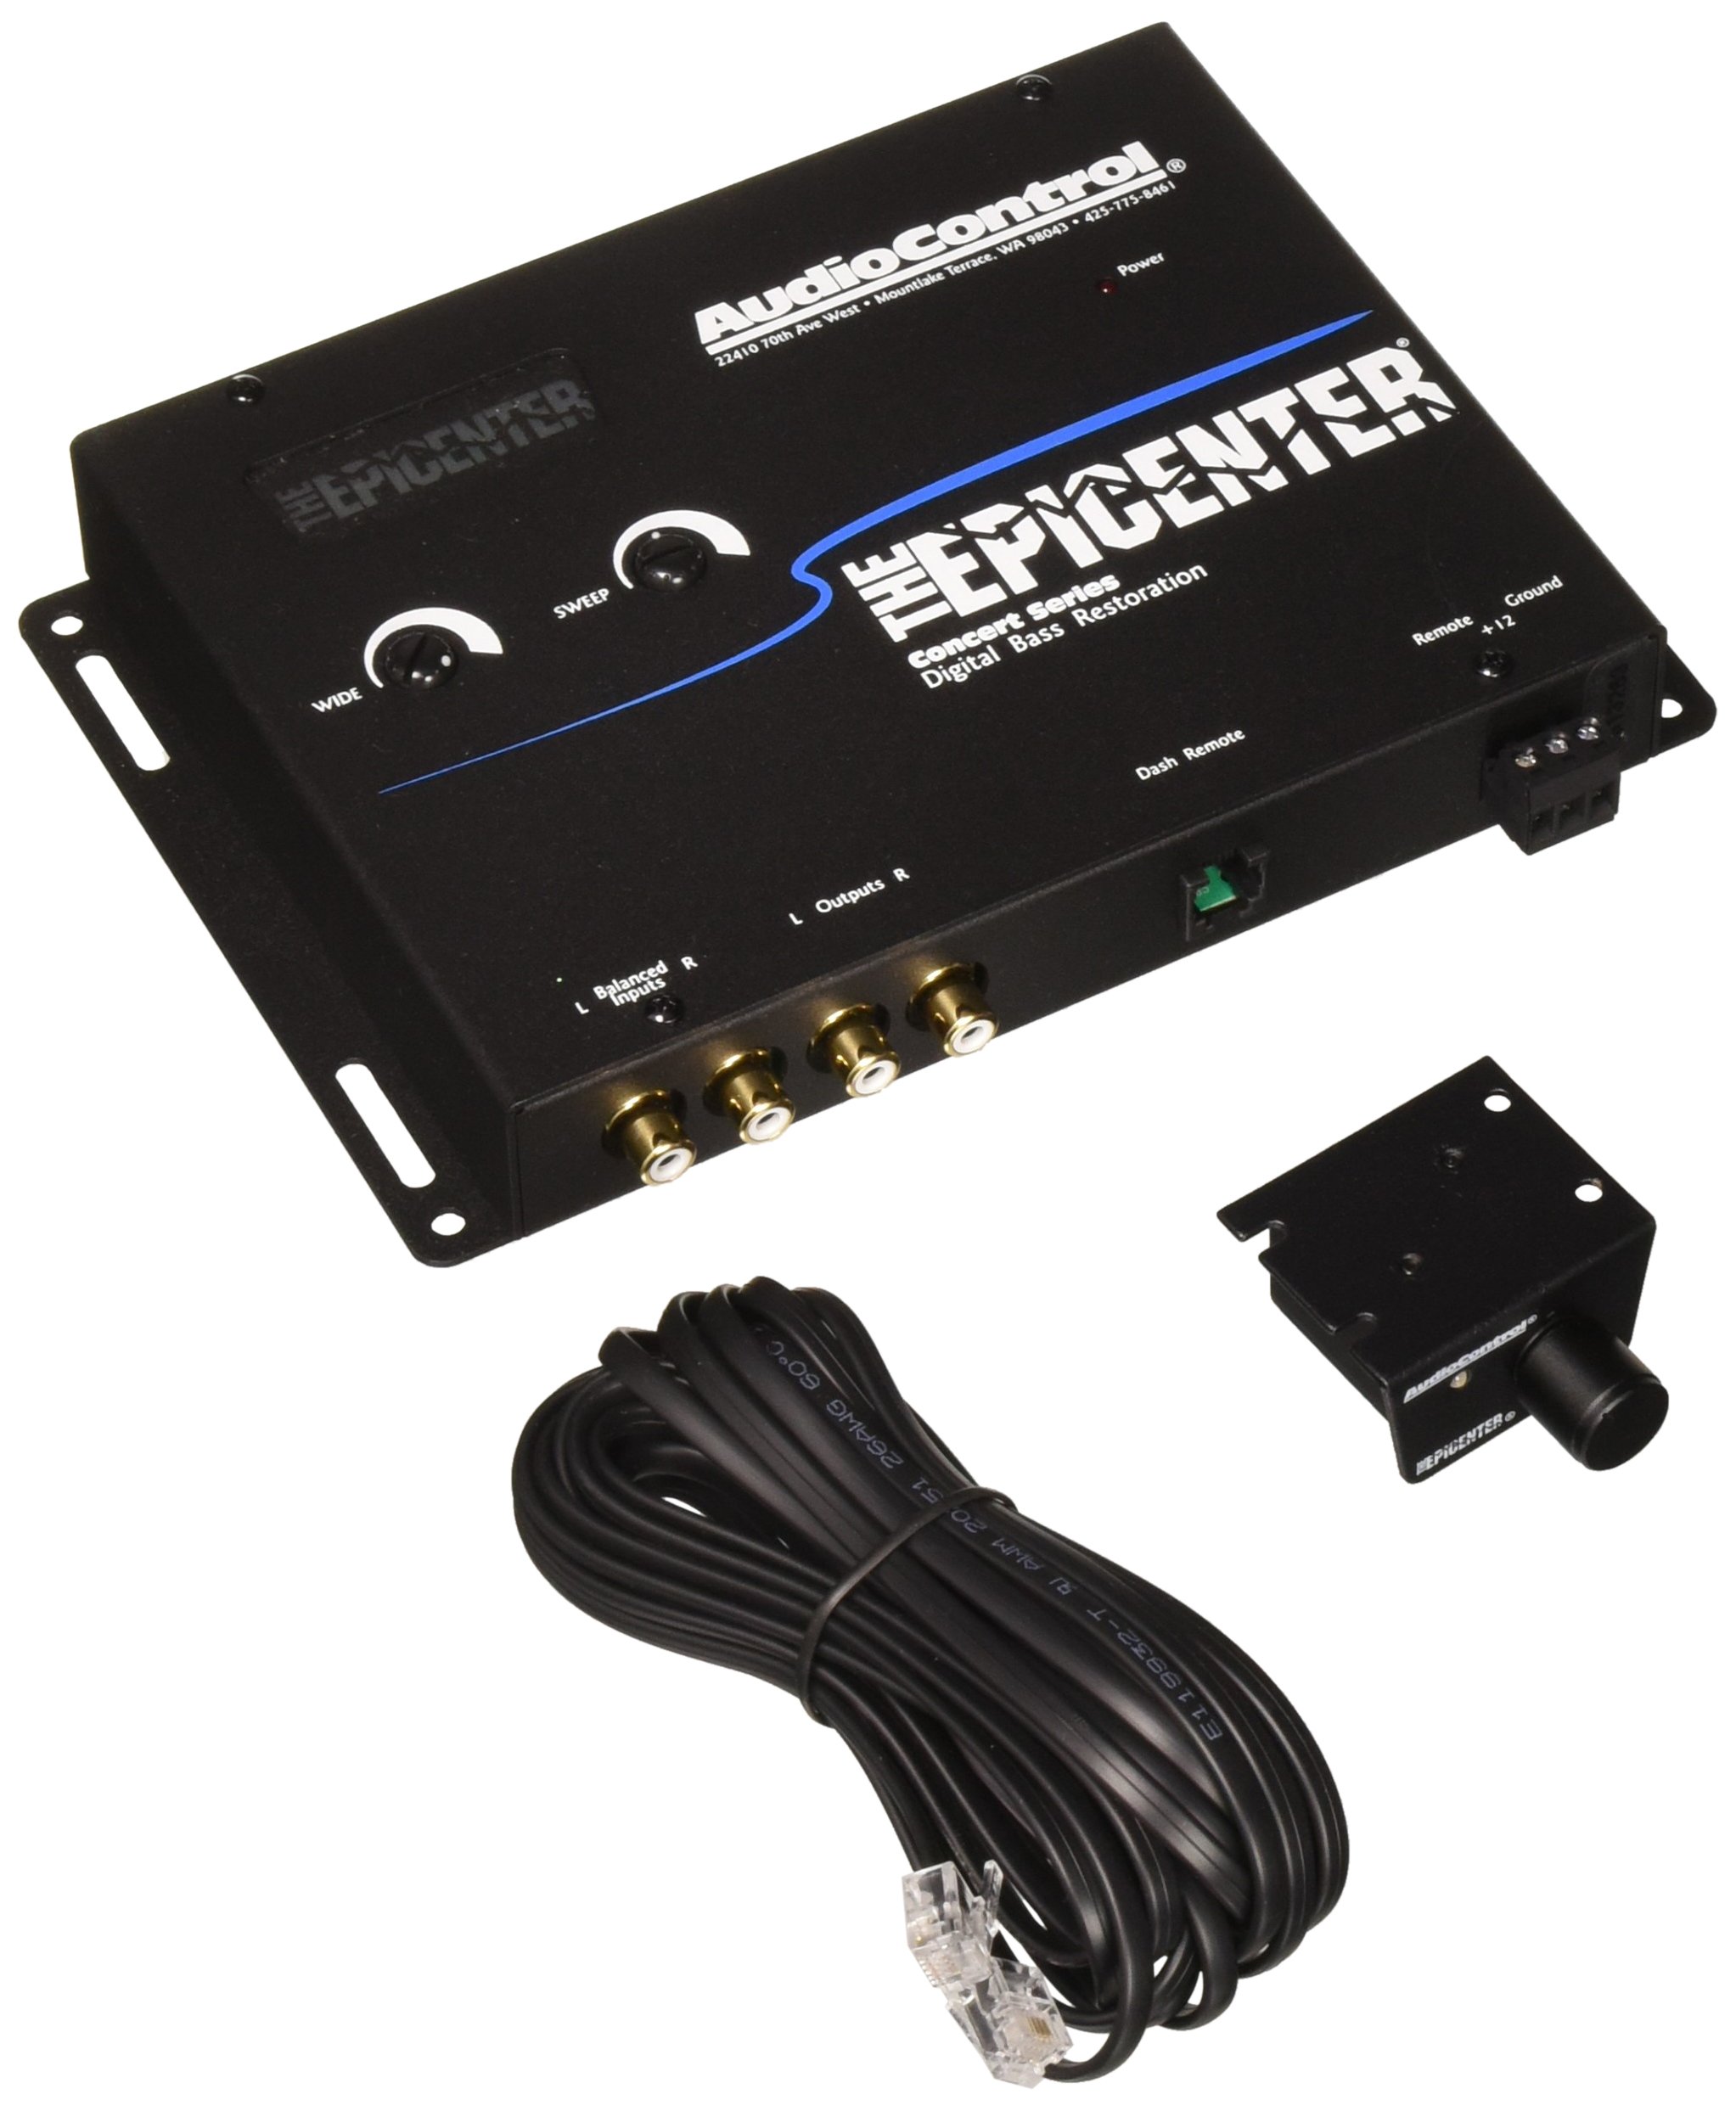 AudioControl The Epicenter Bass Booster Expander & Bass Restoration Processor with Remote